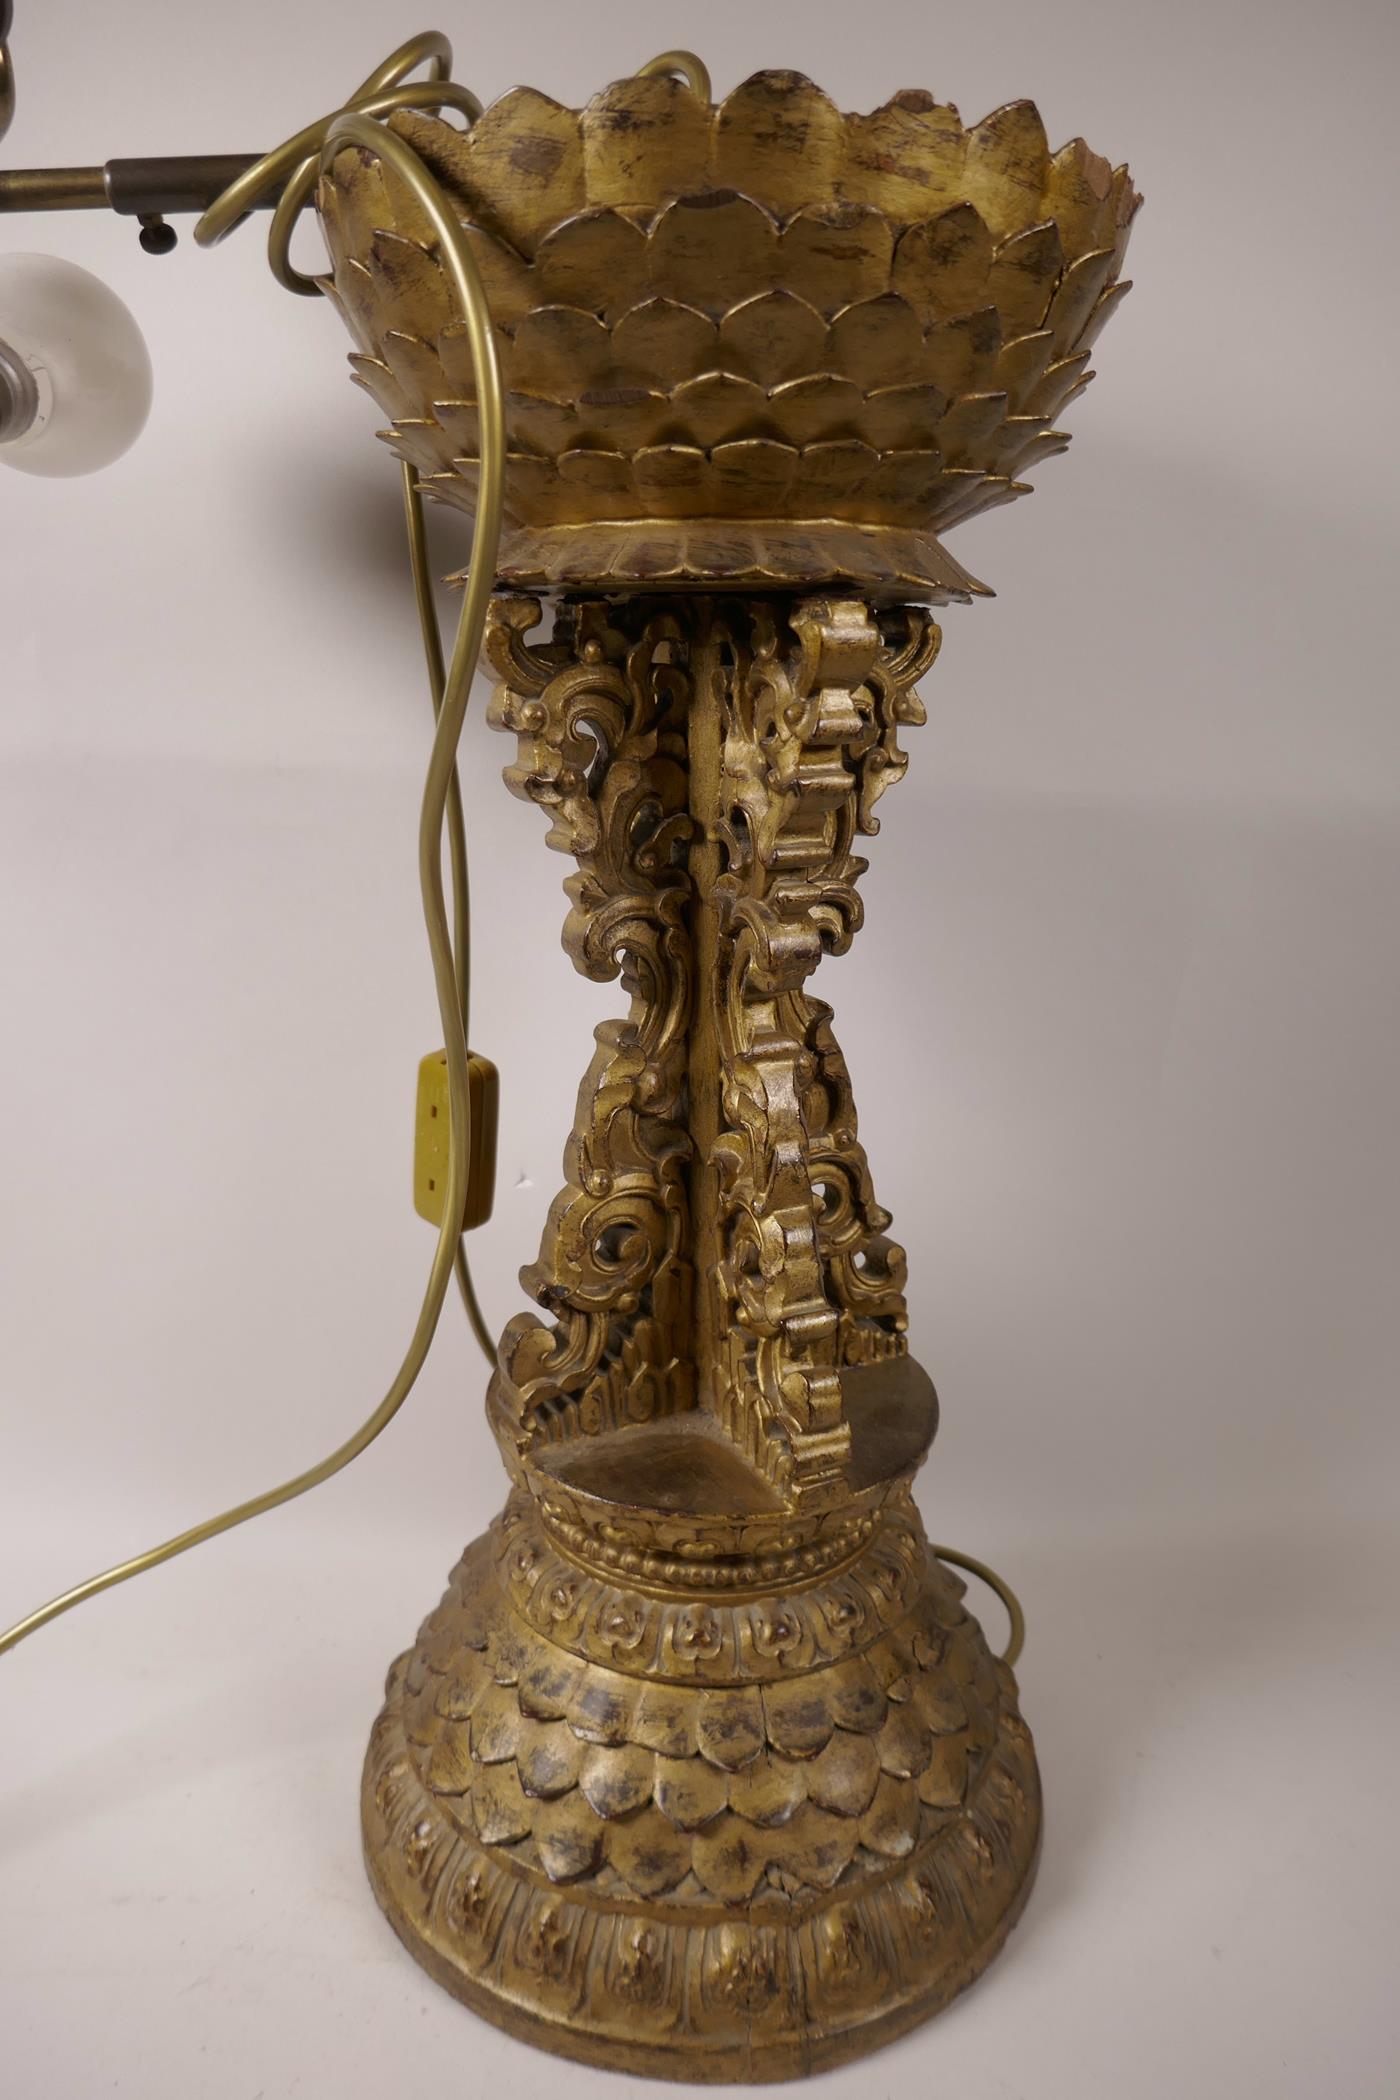 A carved, gilt wood table lamp base, the base and crown in the form of lotus flowers, 19" high